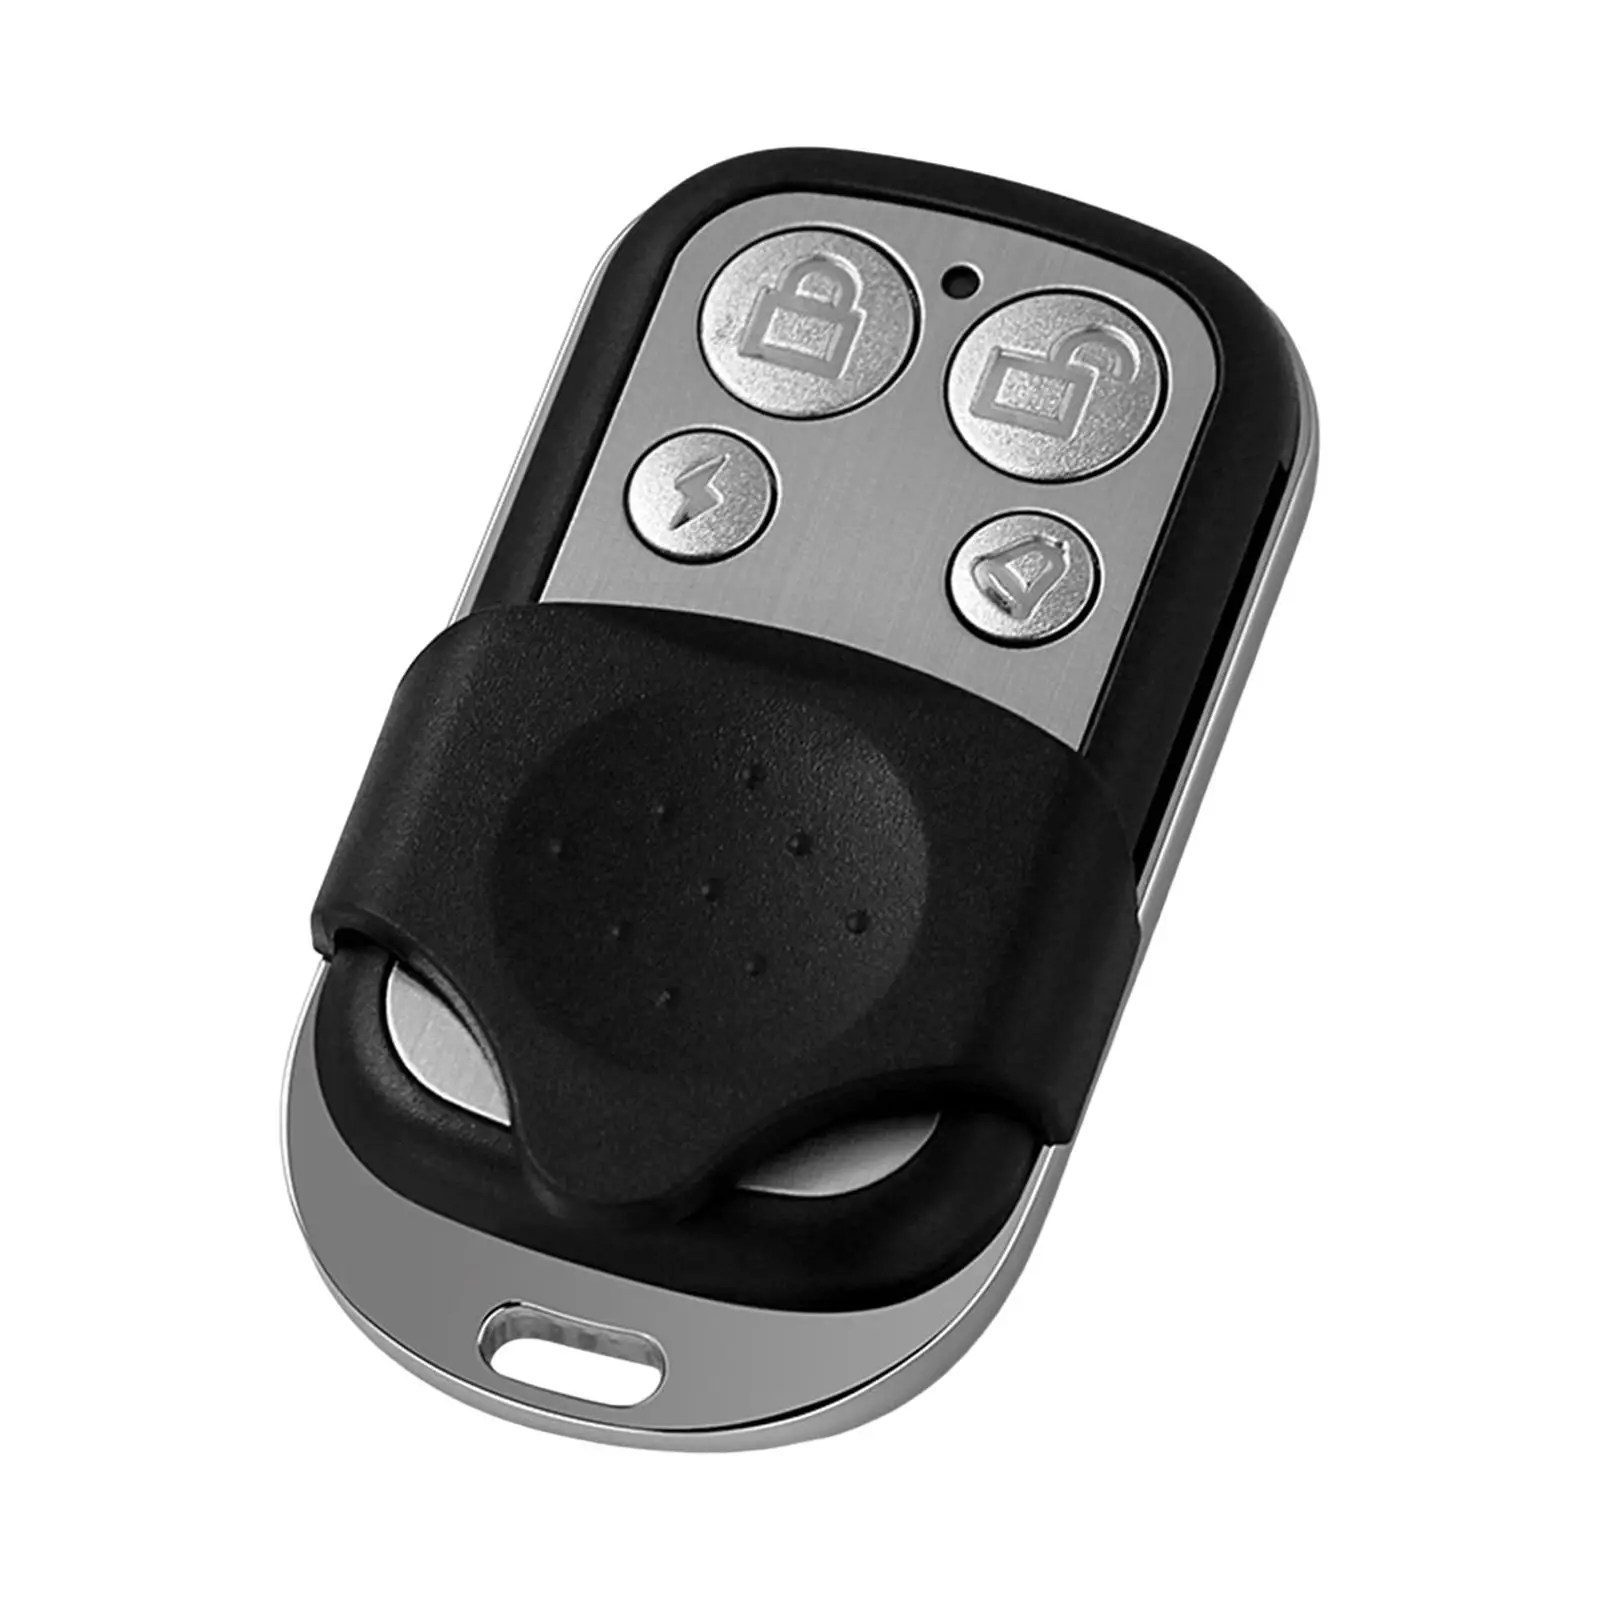 Electric Gate Garage Door Remote Control Electric Gate with 4 Buttons Clone Cloning Code Car Key Cloning Remote Control Key